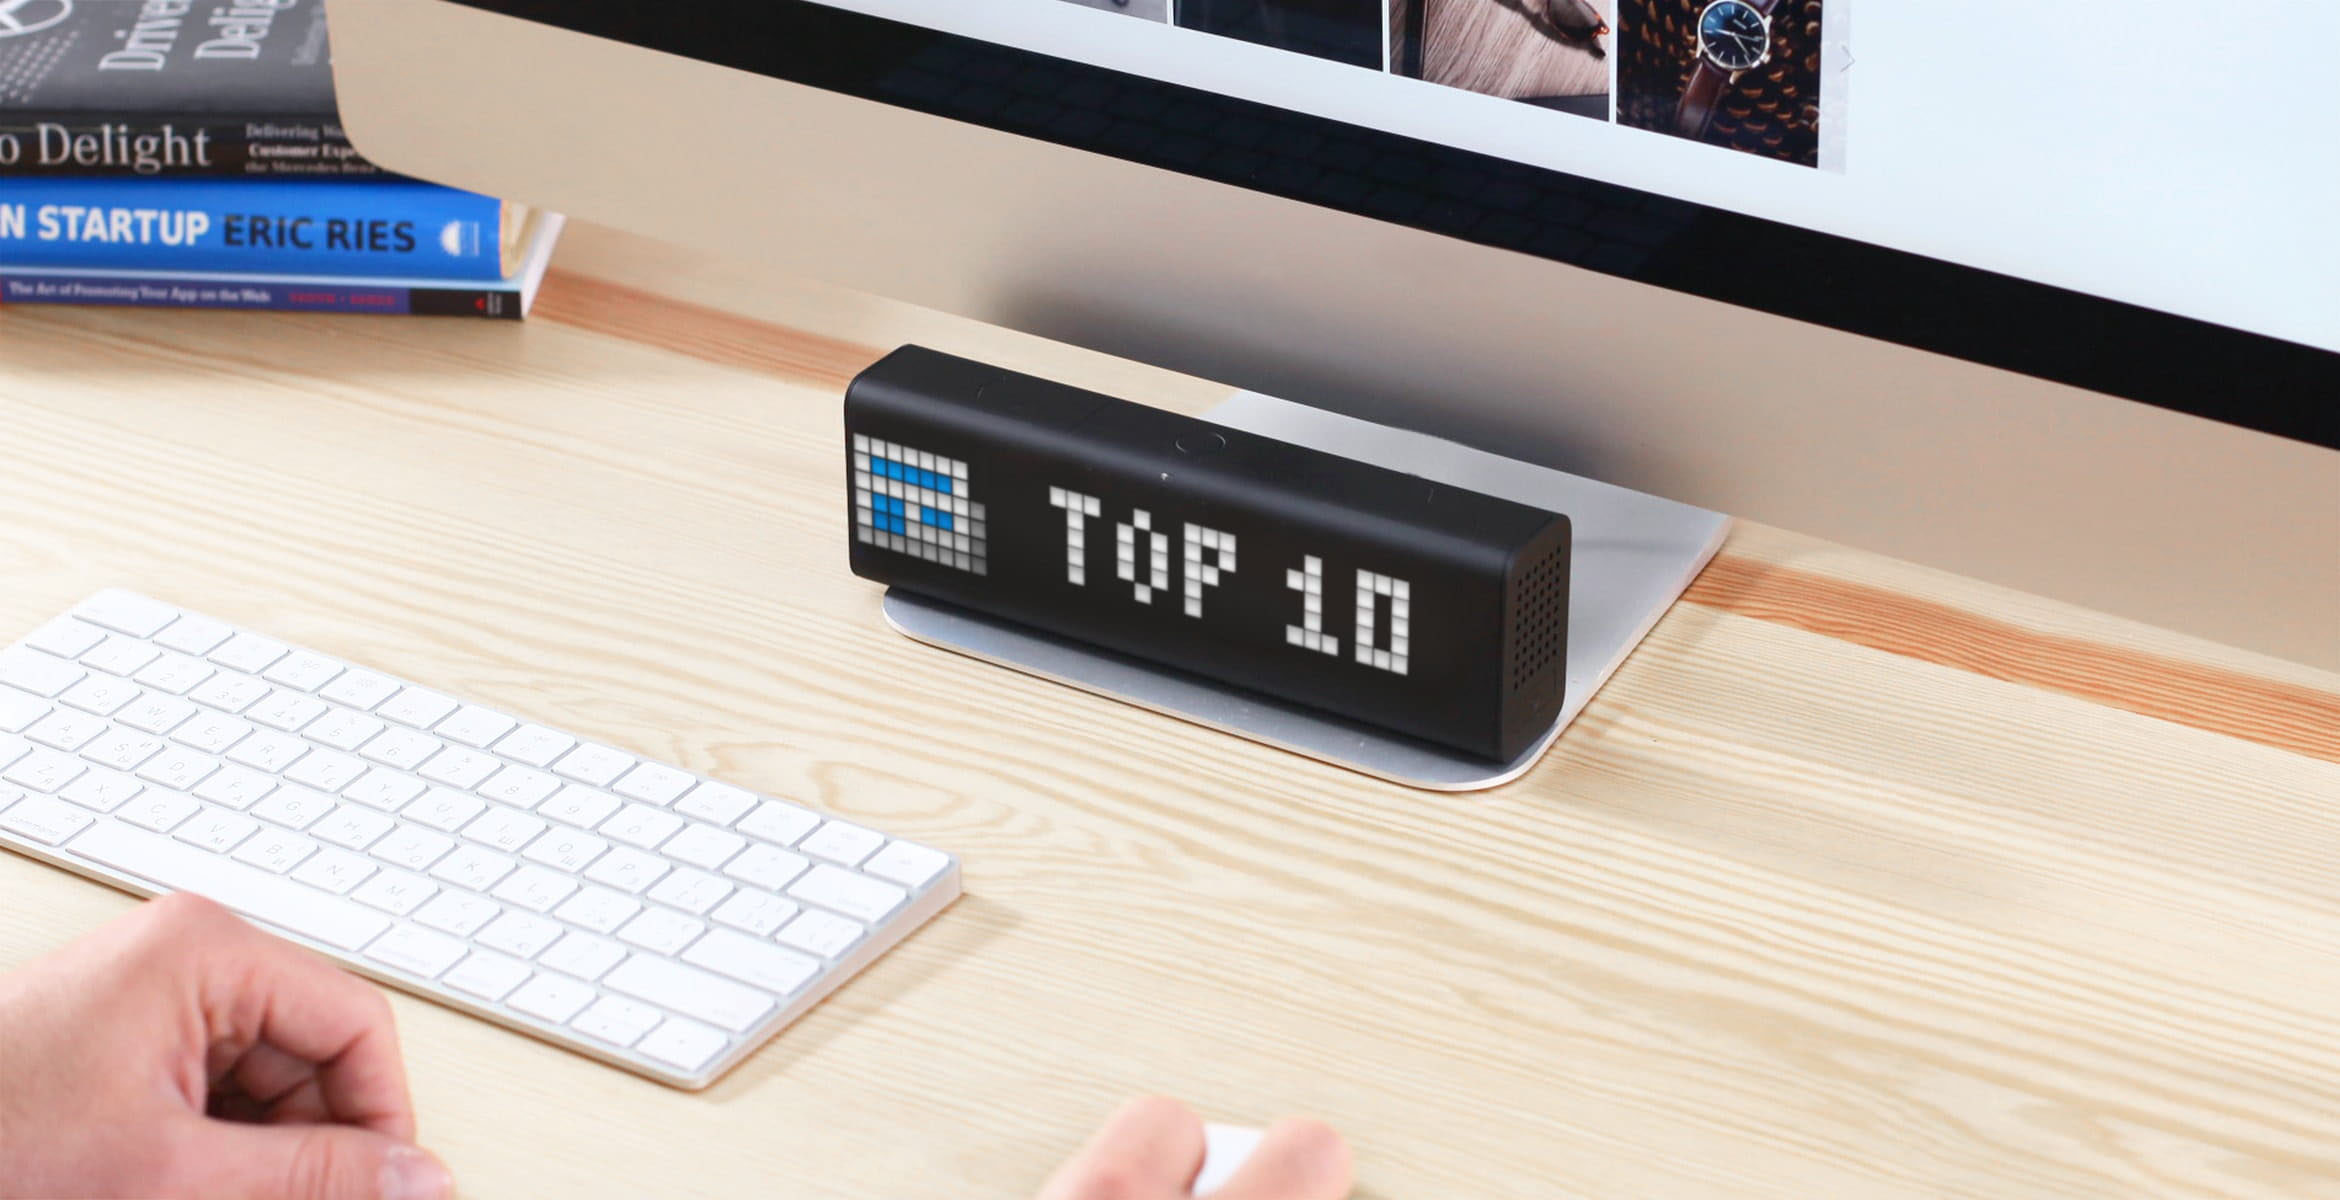 LaMetric Time digital clock complements the desk setup and displays the top-10 news